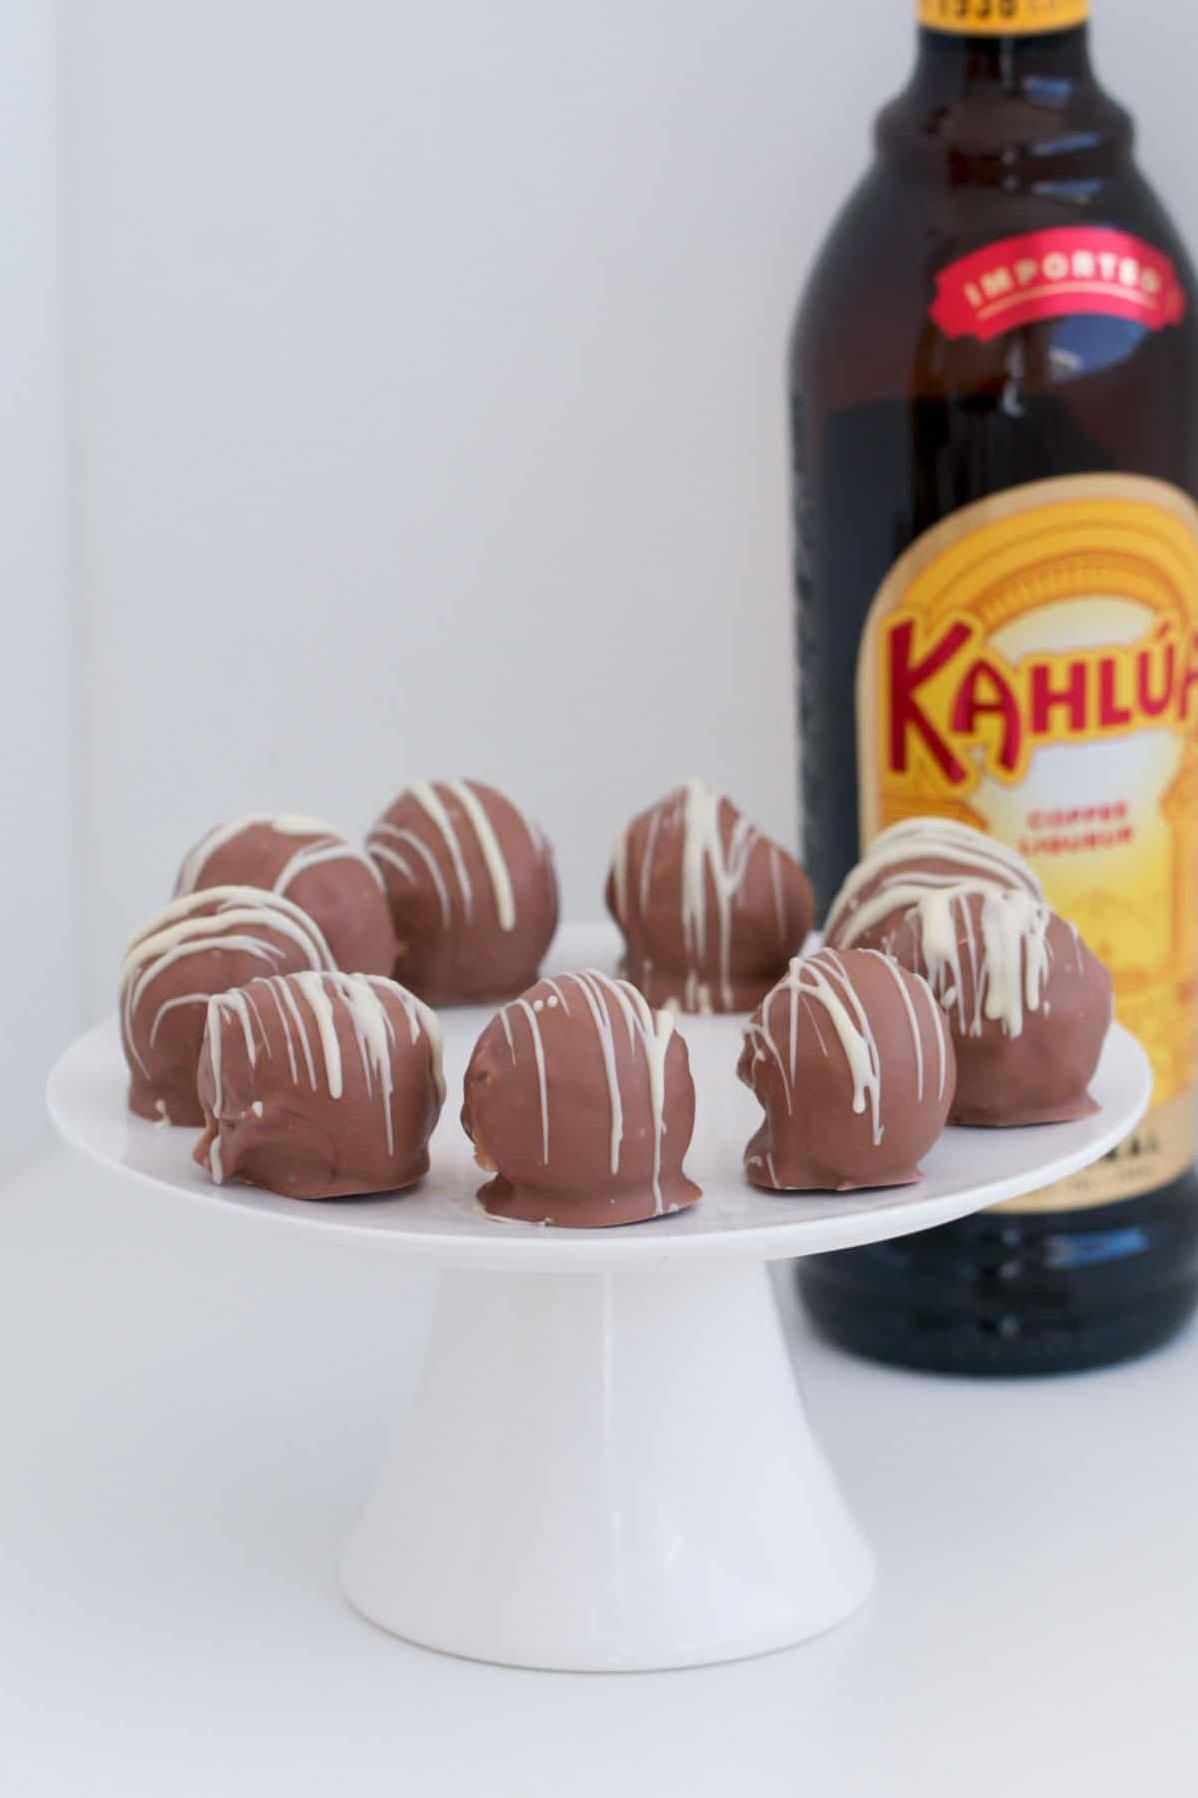  Give your morning coffee routine a twist with these delicious coffee Kahlua balls.